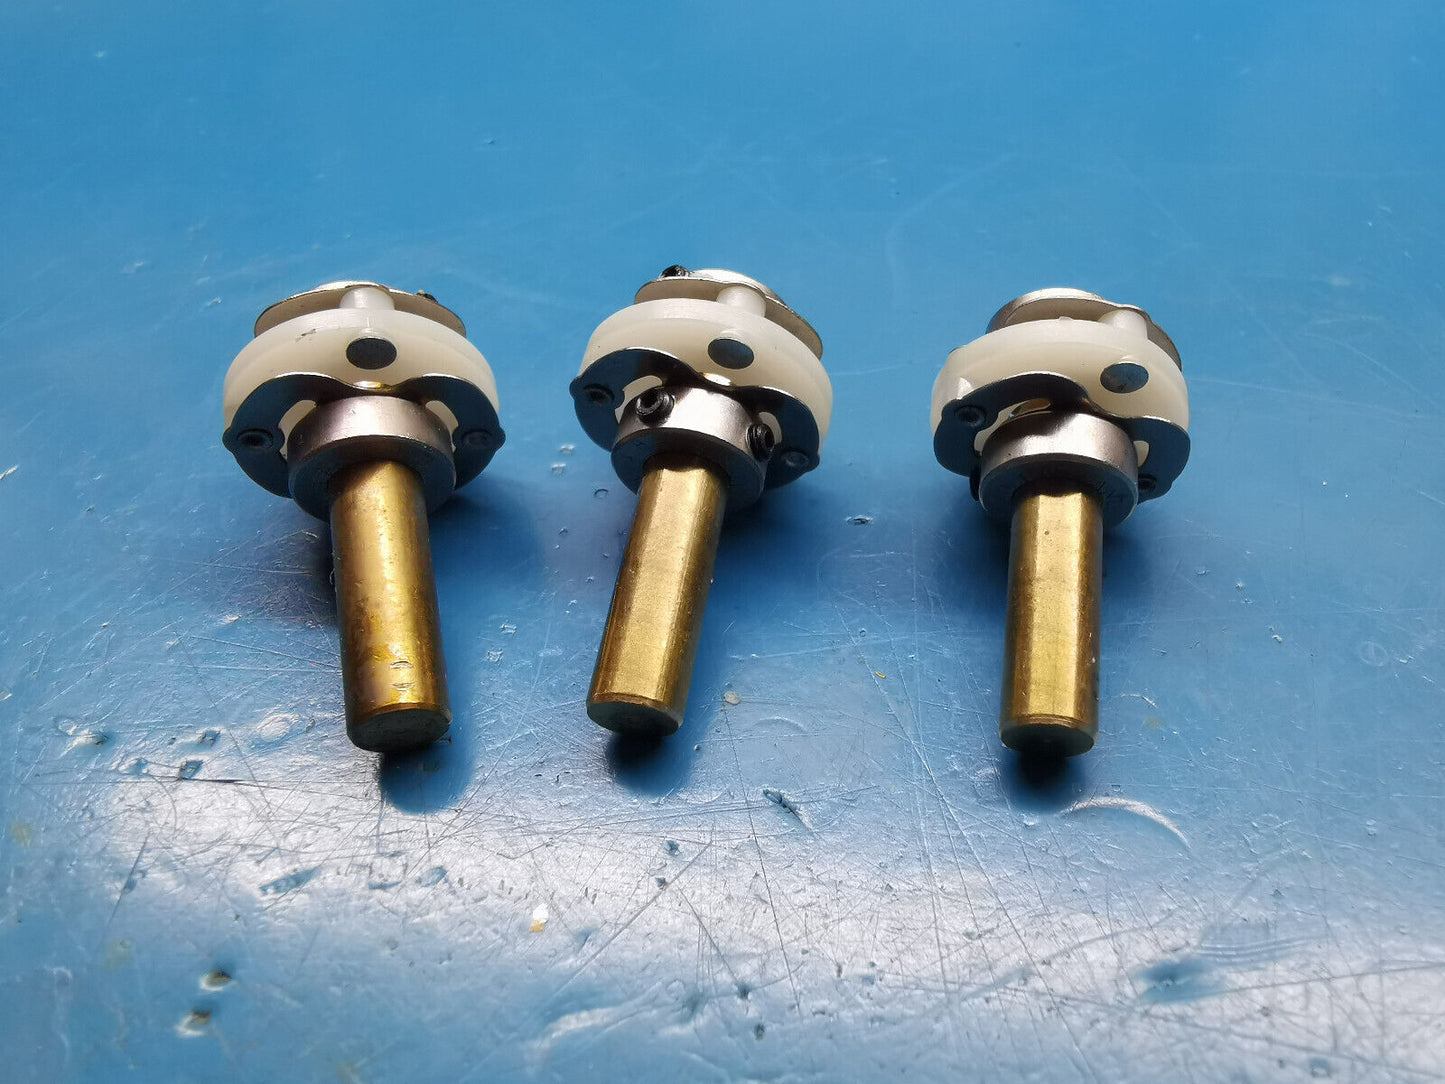 3 x 6mm Shaft Coupler And Extender For Potentiometer / Capacitor